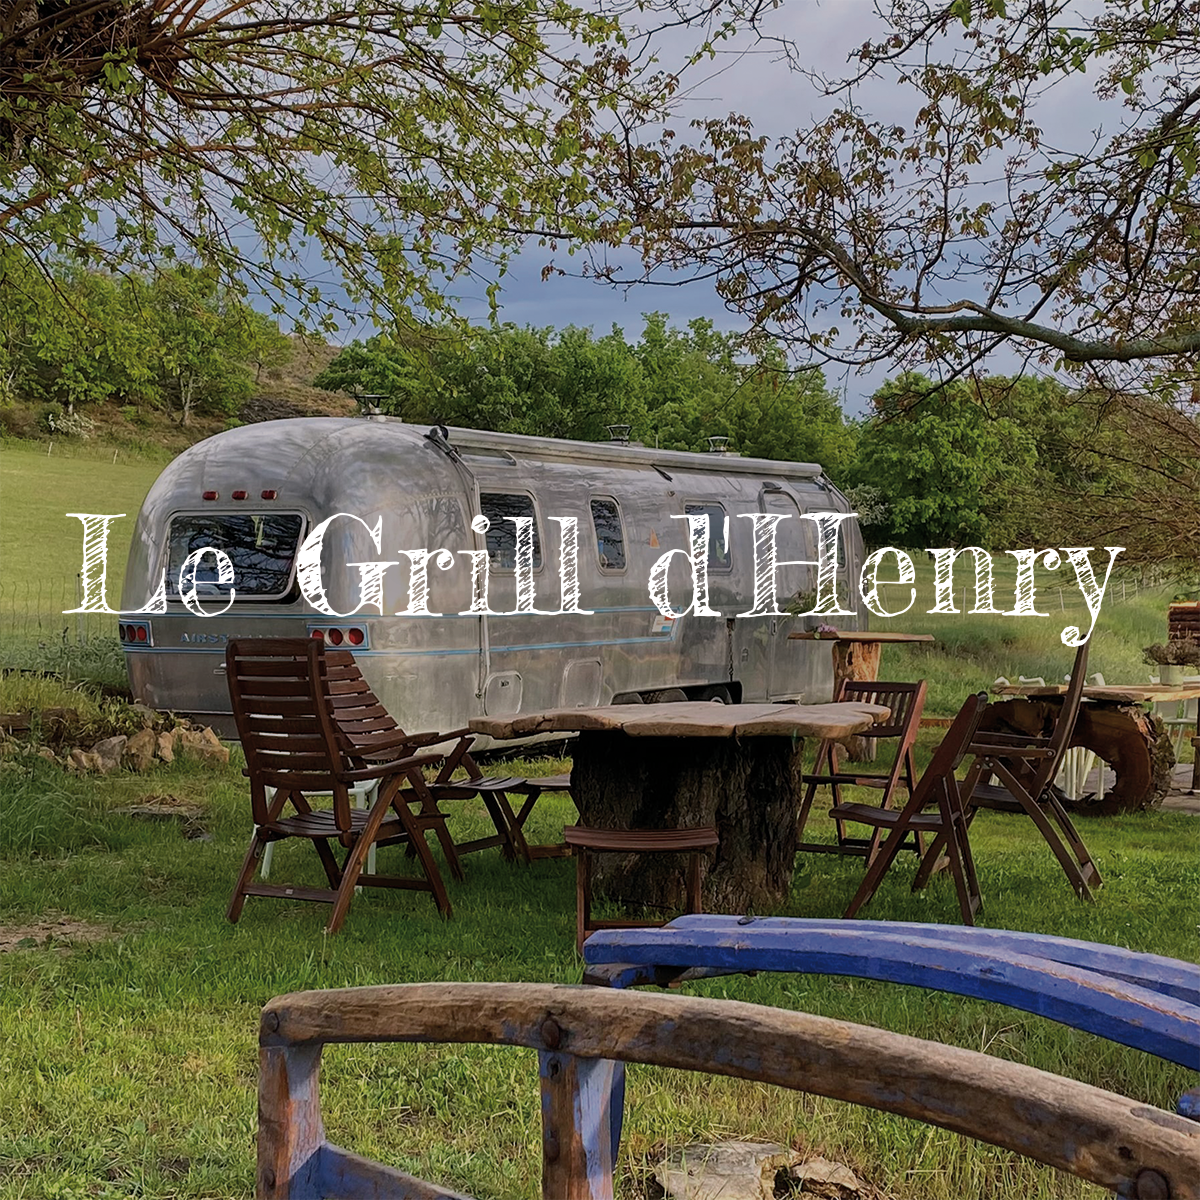 LE GRILL D'HENRY